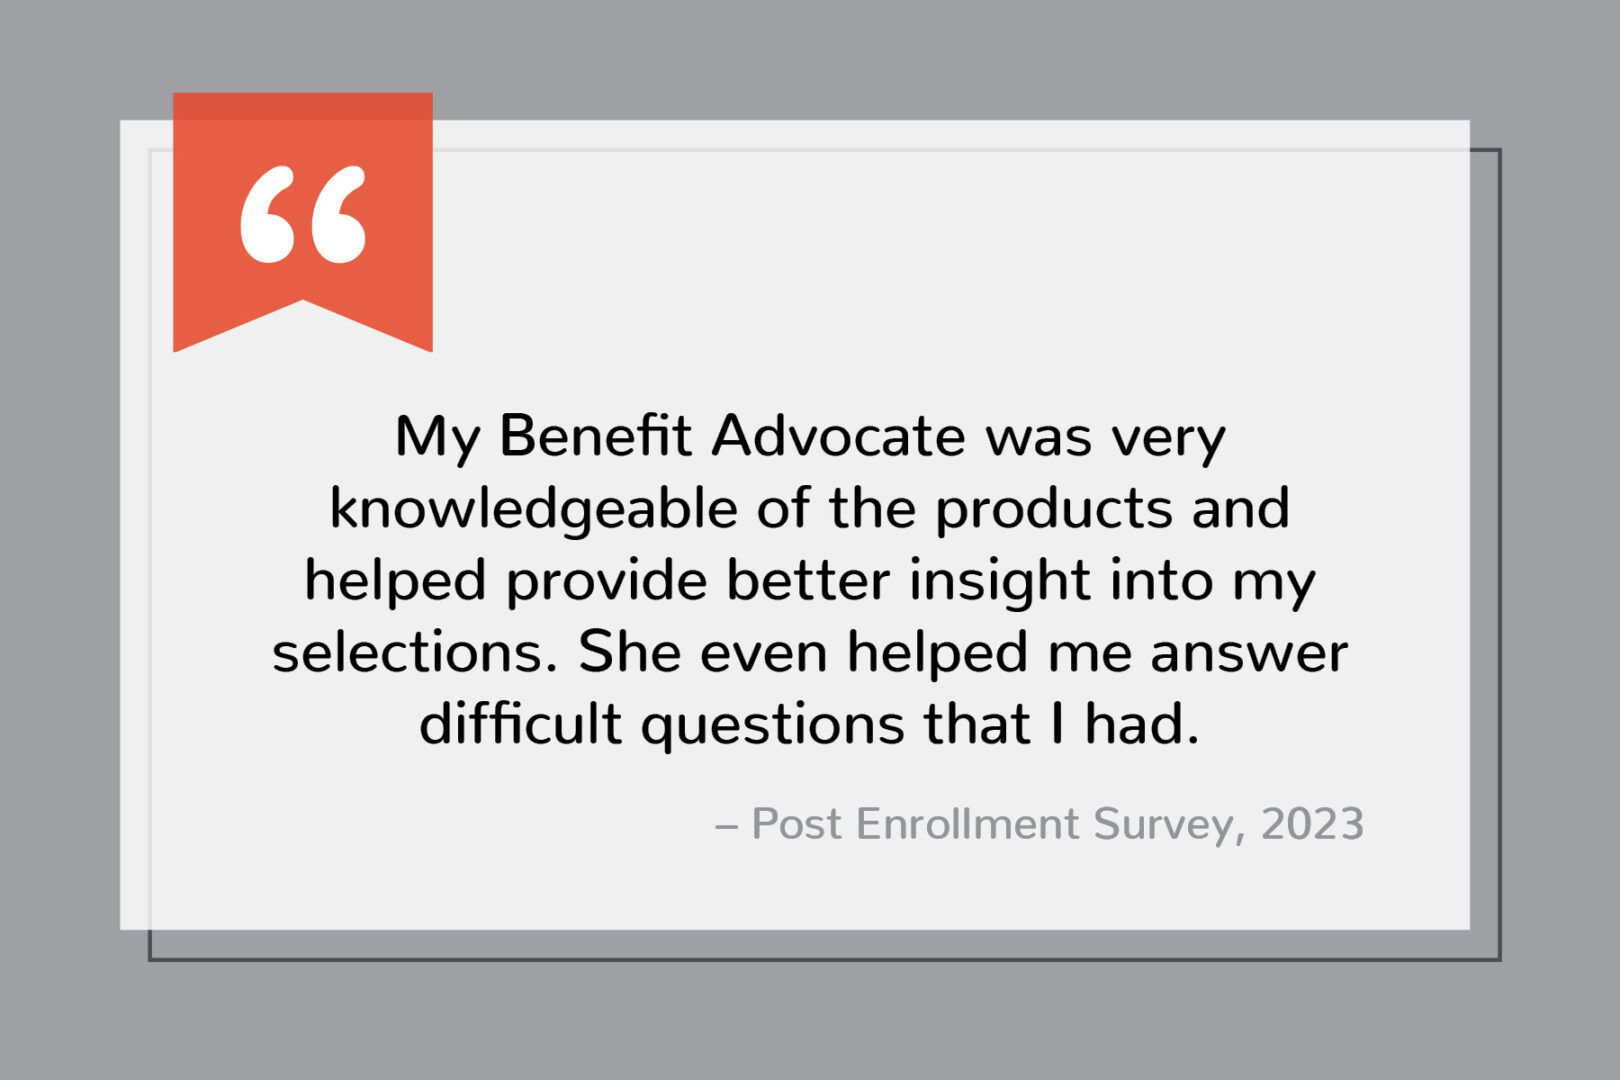 A testimonial from a benefit advocate for the post enrollment survey.